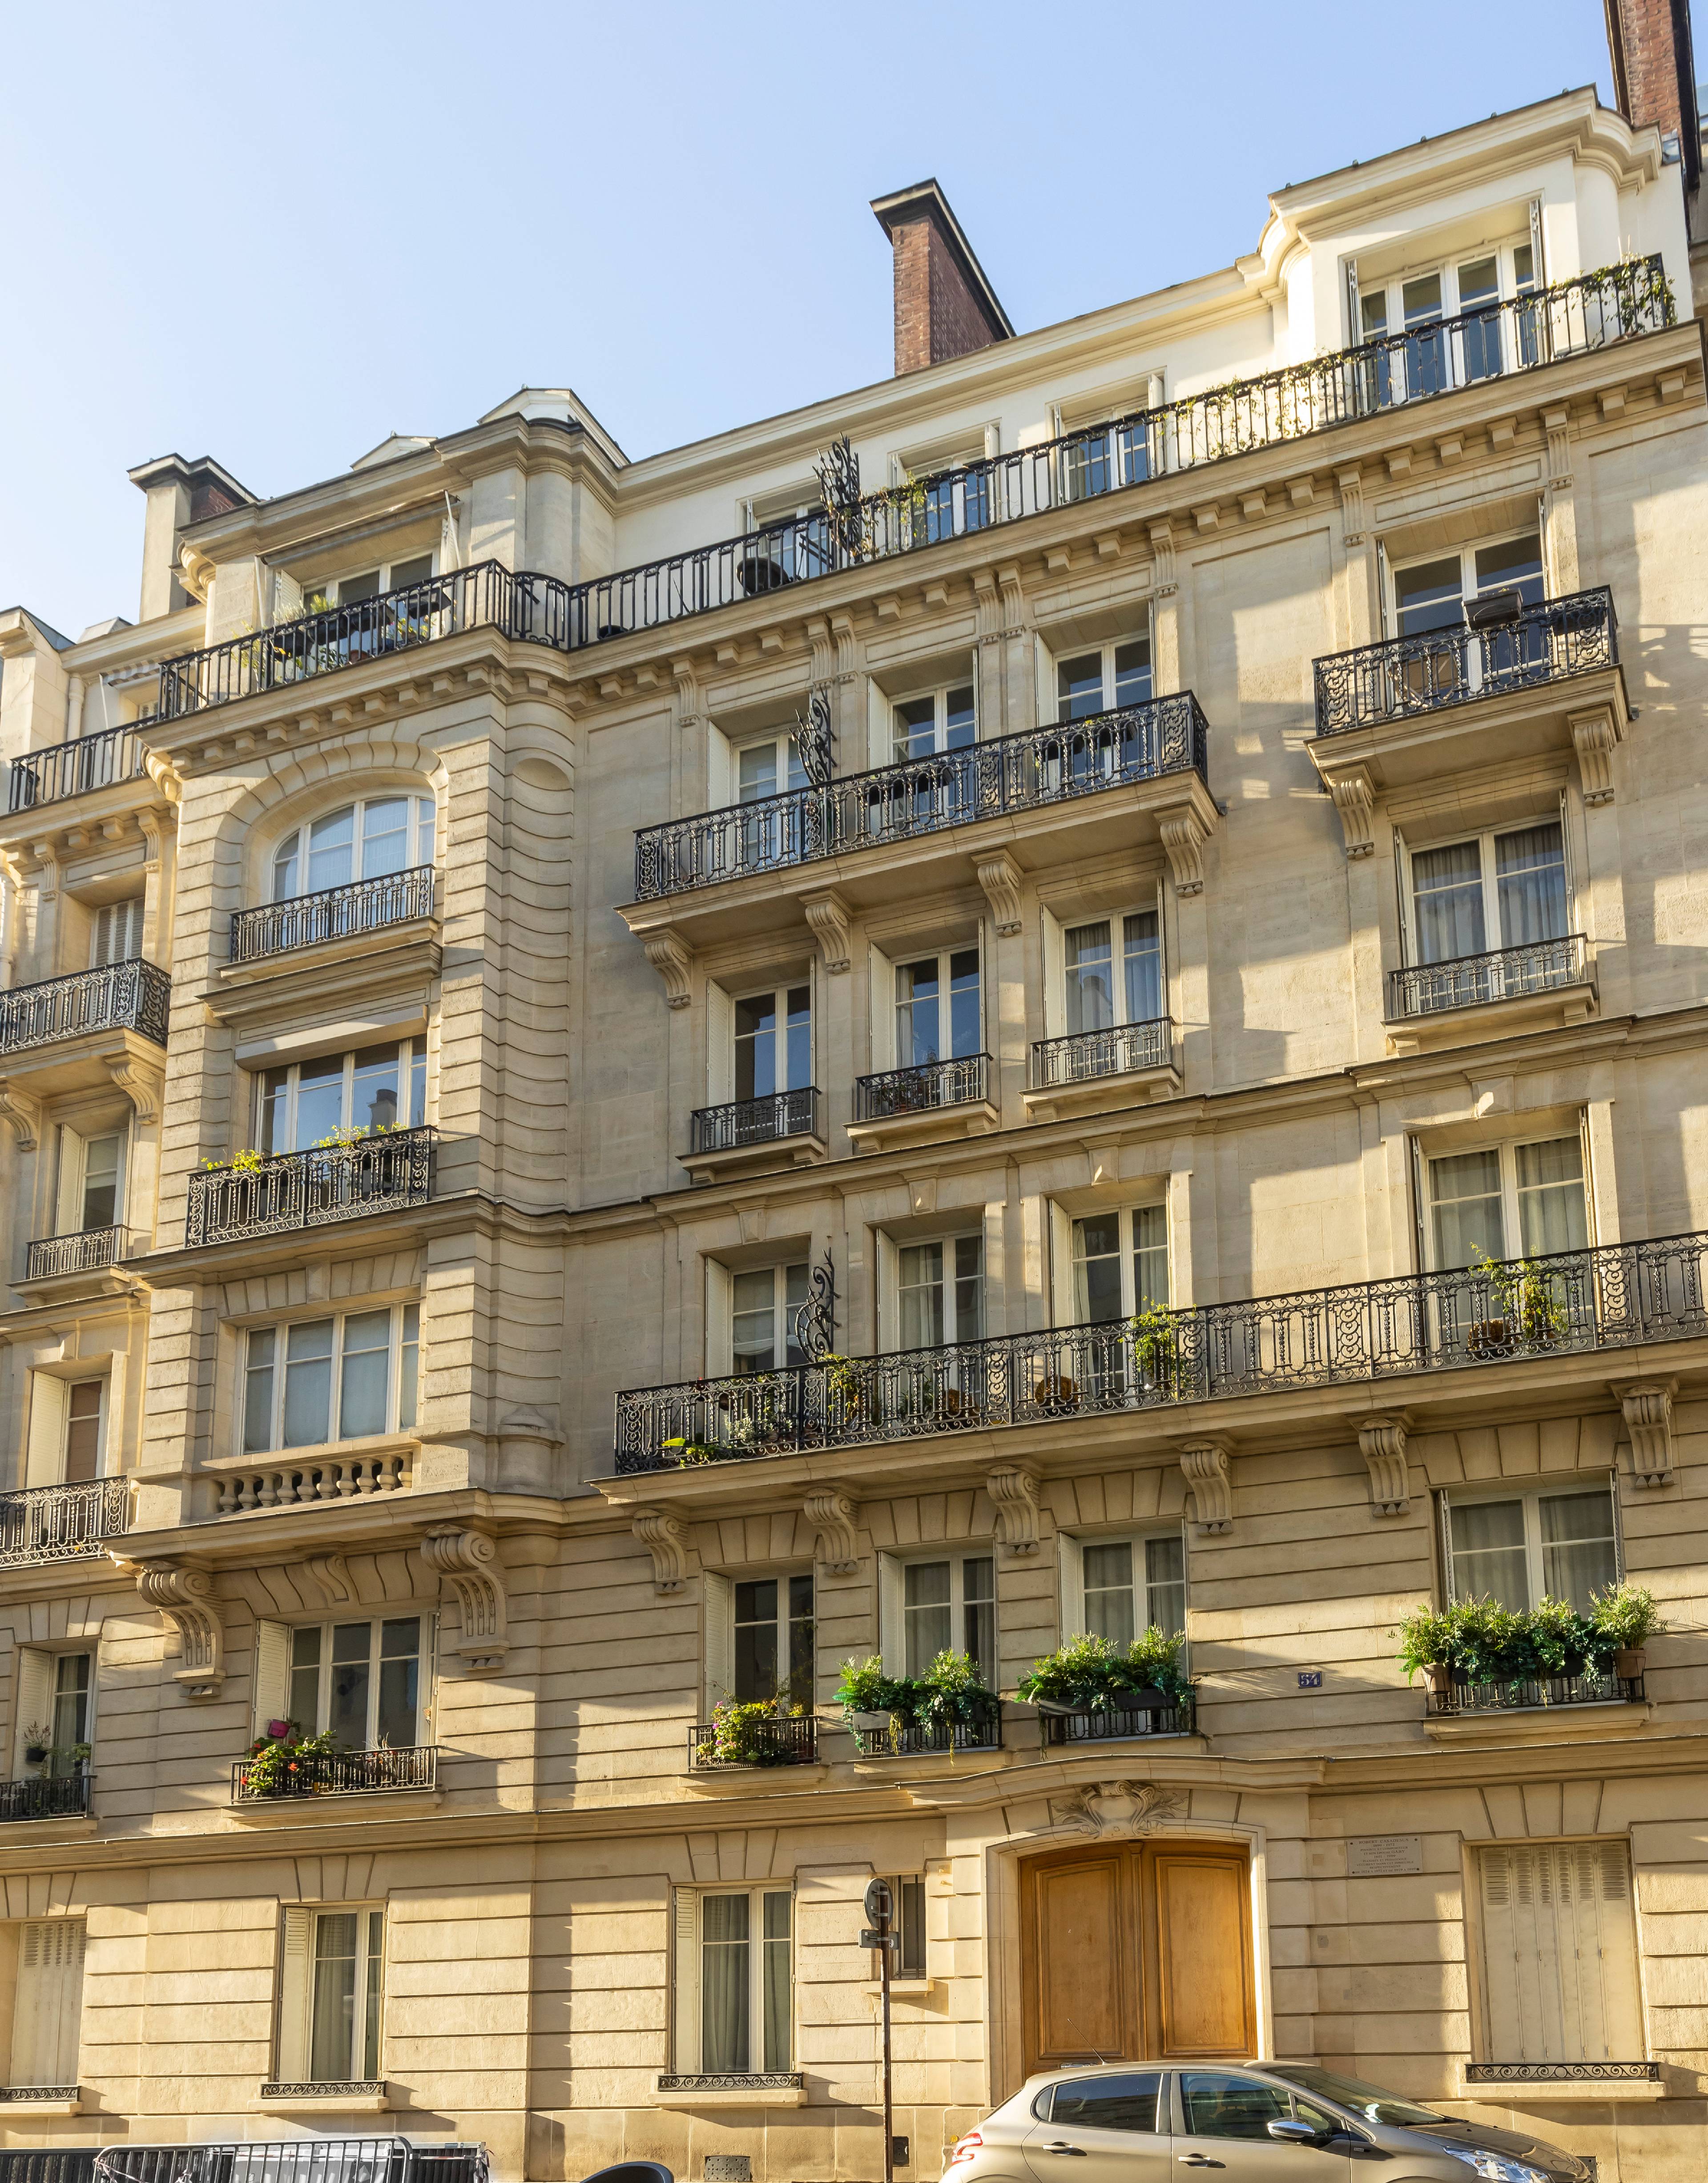 HAUSSMANNIAN BUILDING FEATURING A MAGNIFICENTLY GUT RENOVATED DUPLEX RESIDENCE IN PARIS’ MOST DISTINGUISHED NEIGHBORHOOD